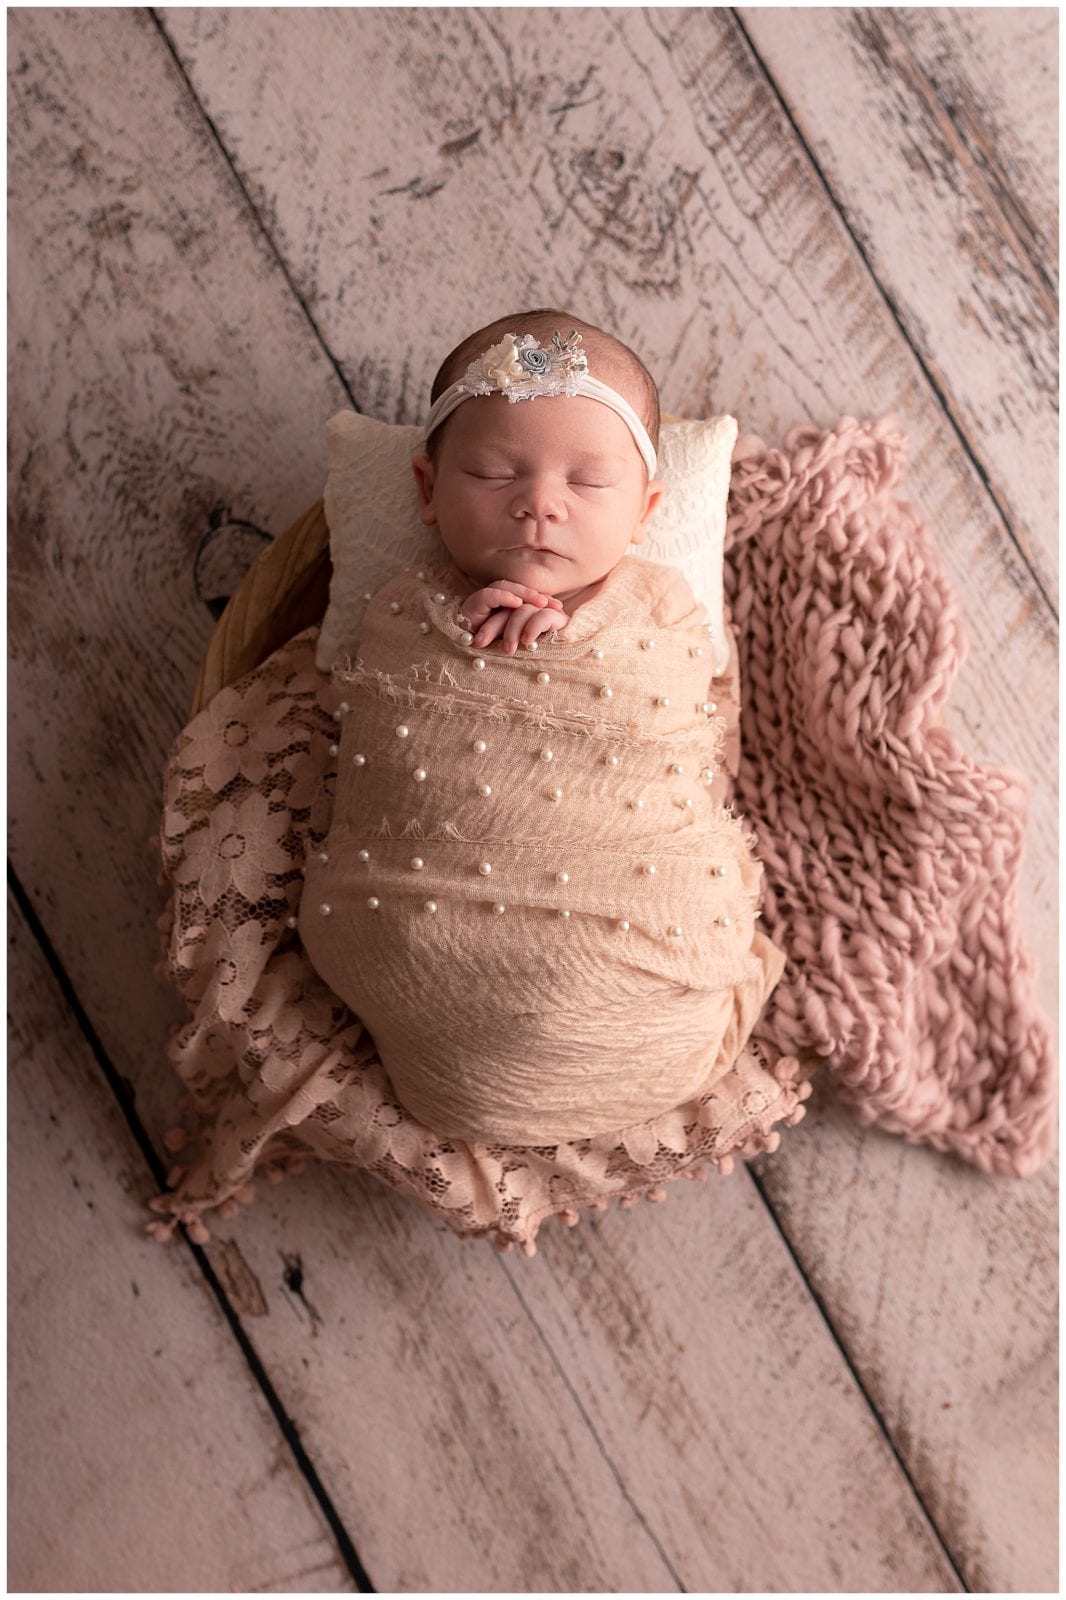 A wrapped newborn photo by Hello Photography